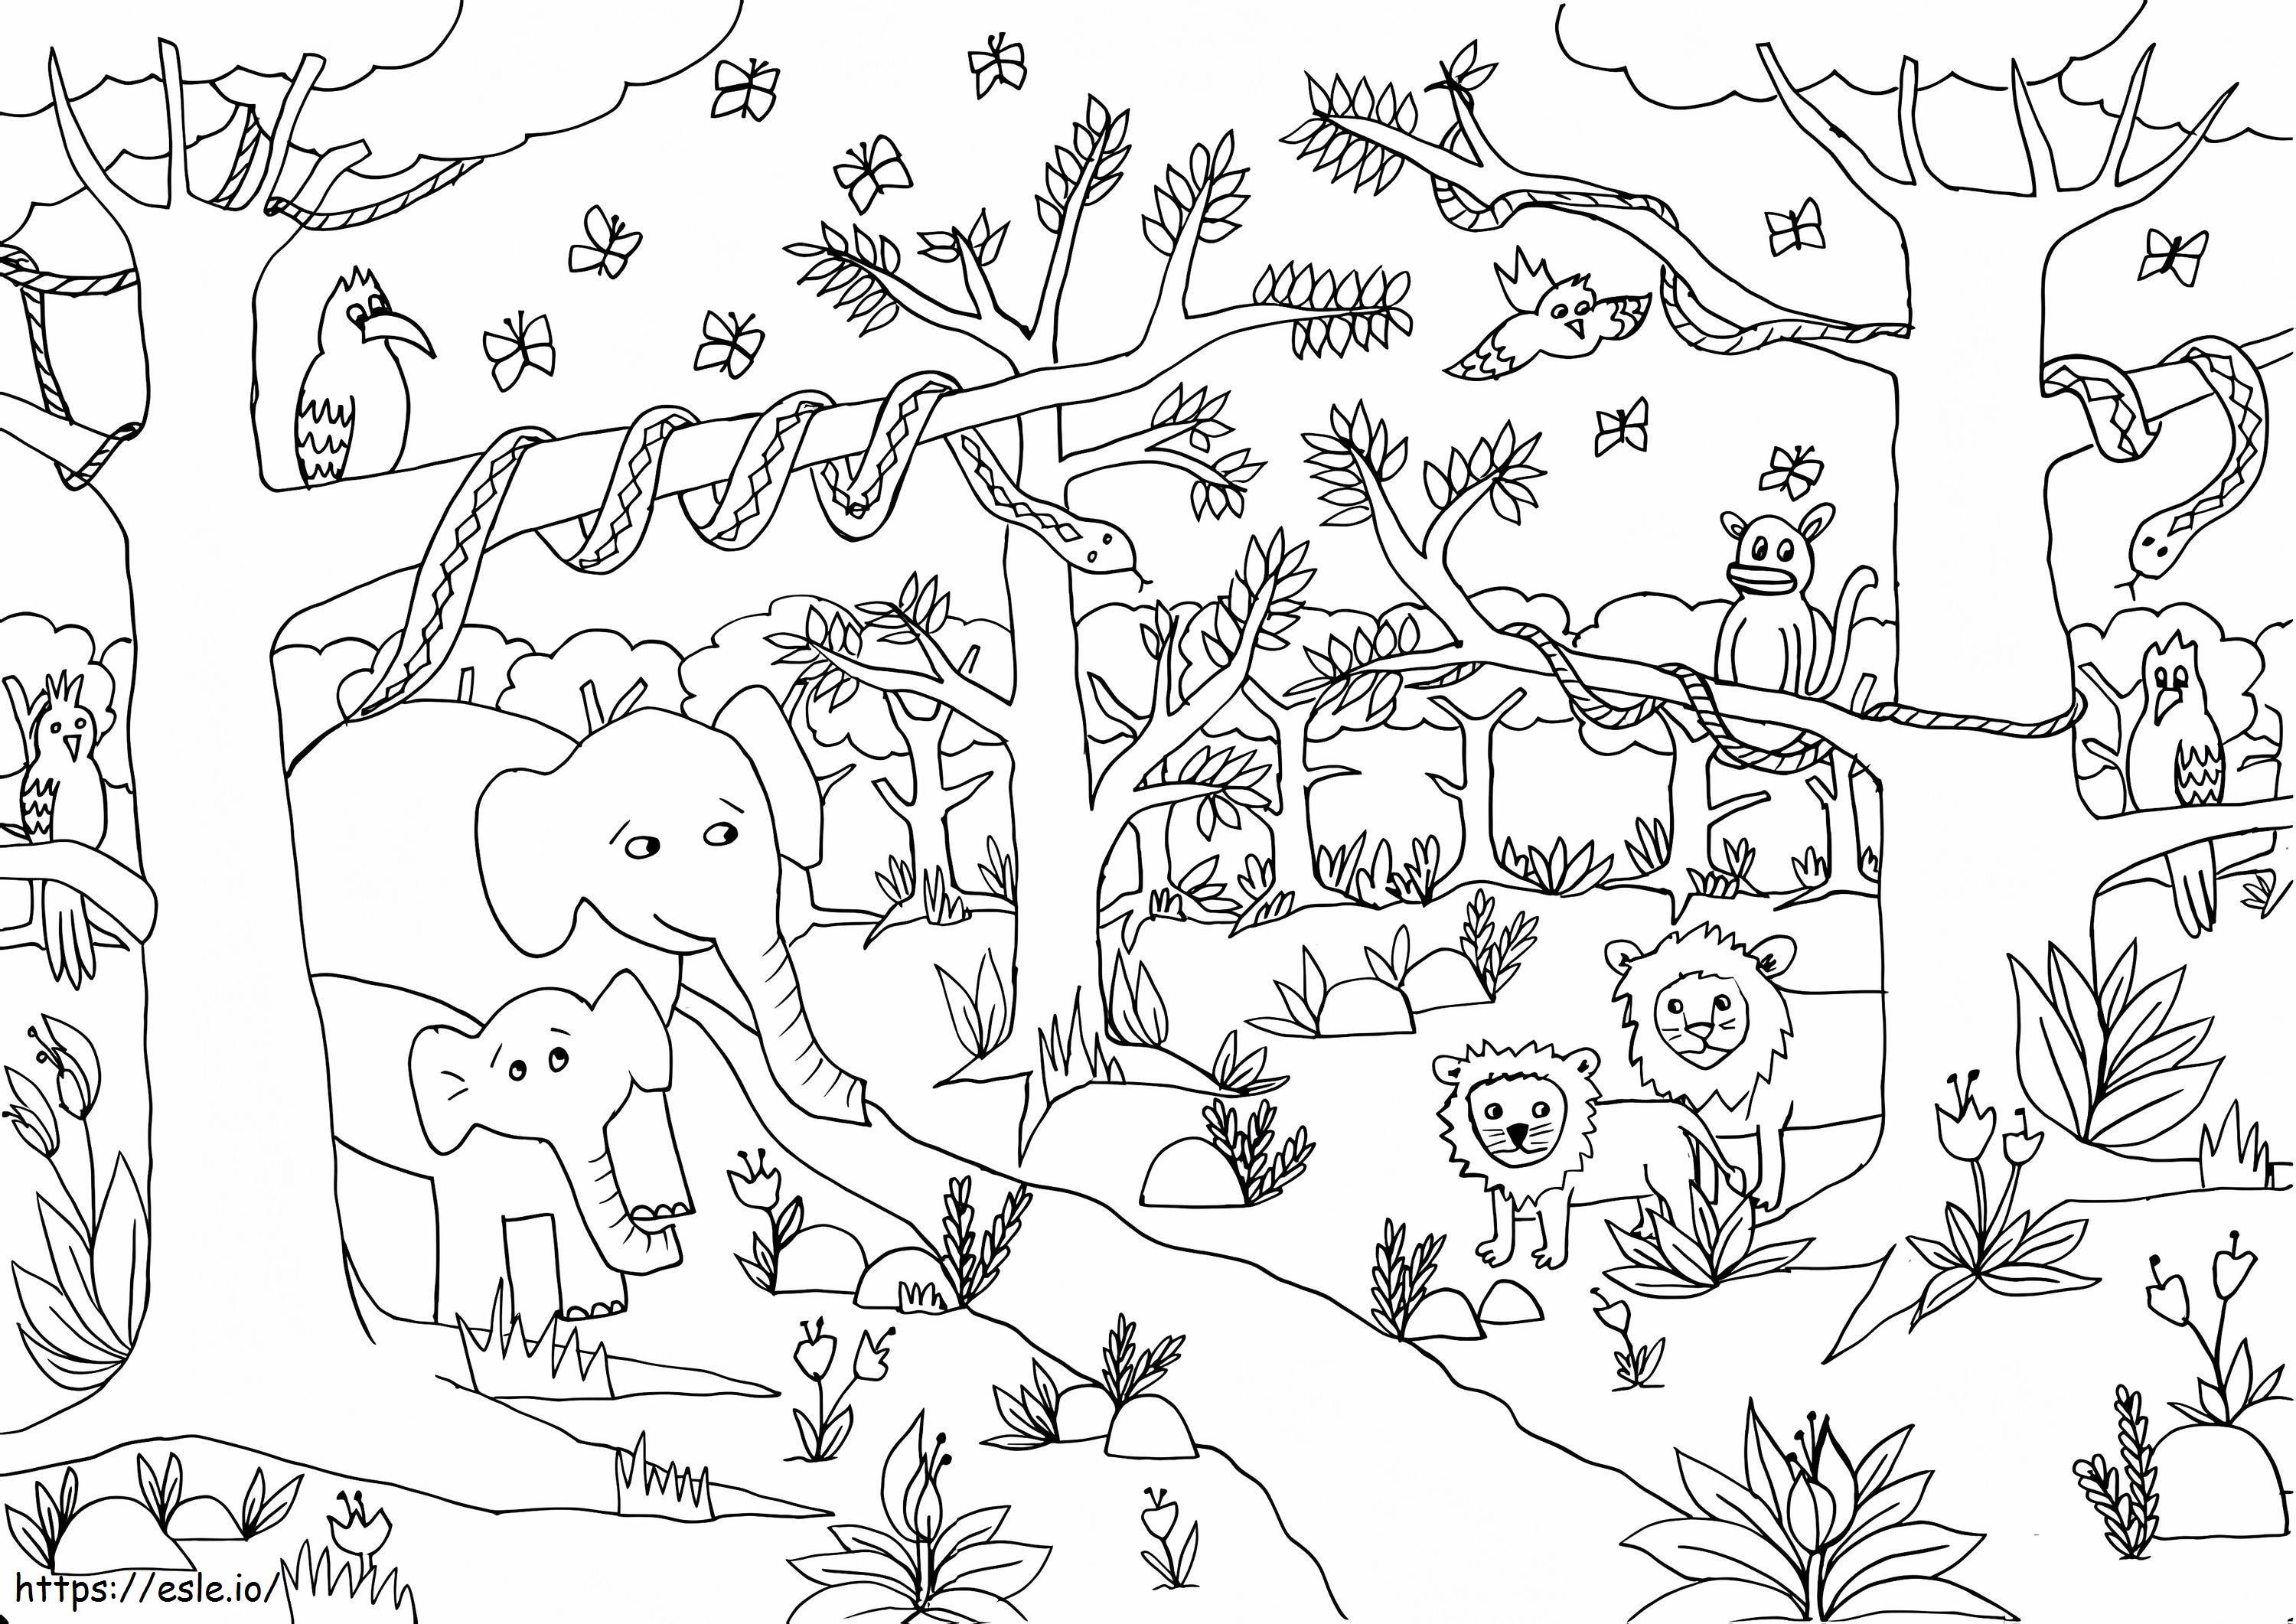 Jungle coloring page